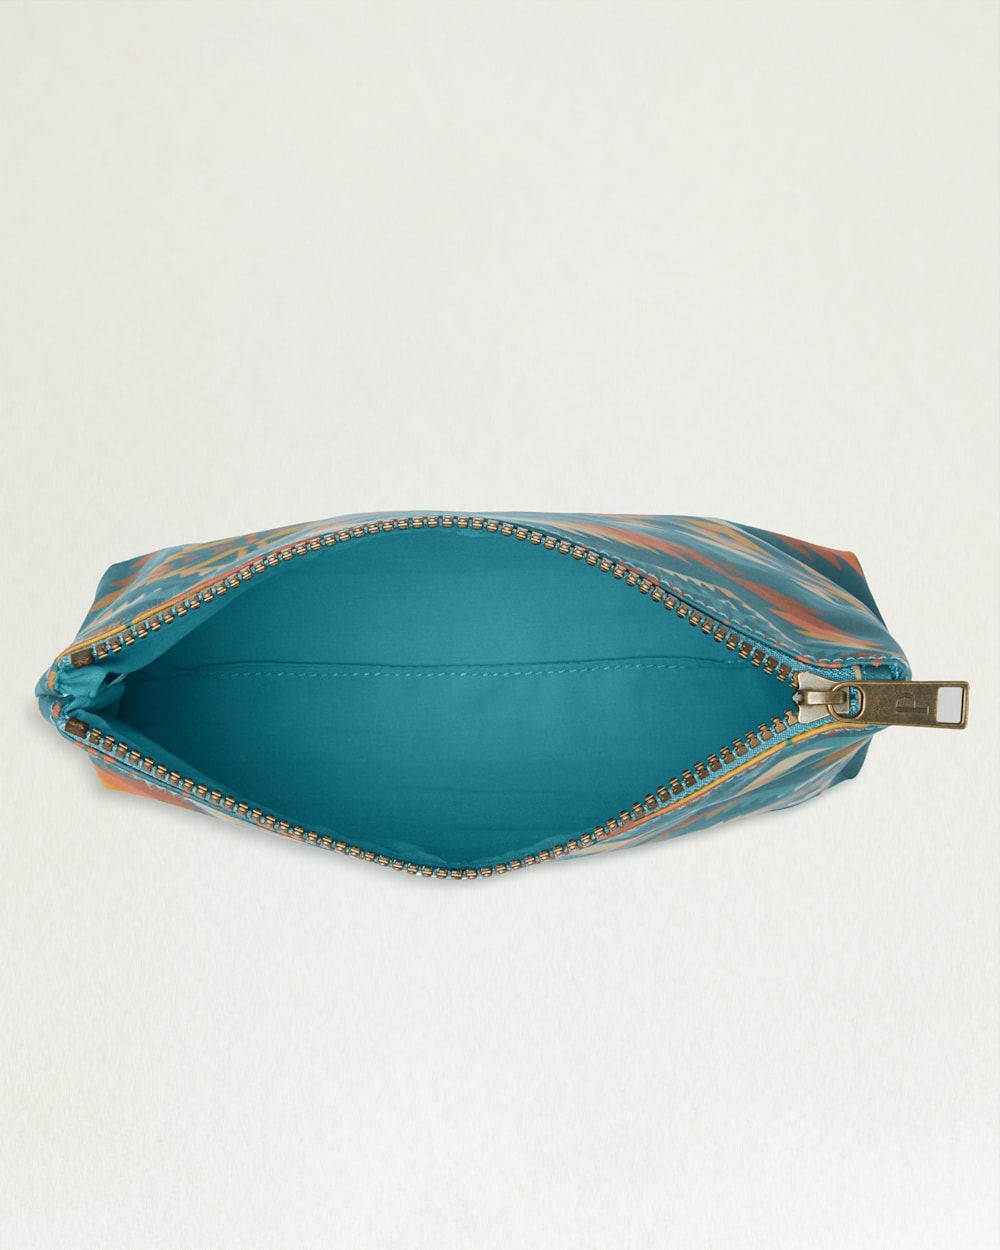 ALTERNATE VIEW OF SUMMERLAND BRIGHT CANOPY CANVAS ZIP POUCH IN TURQUOISE image number 3